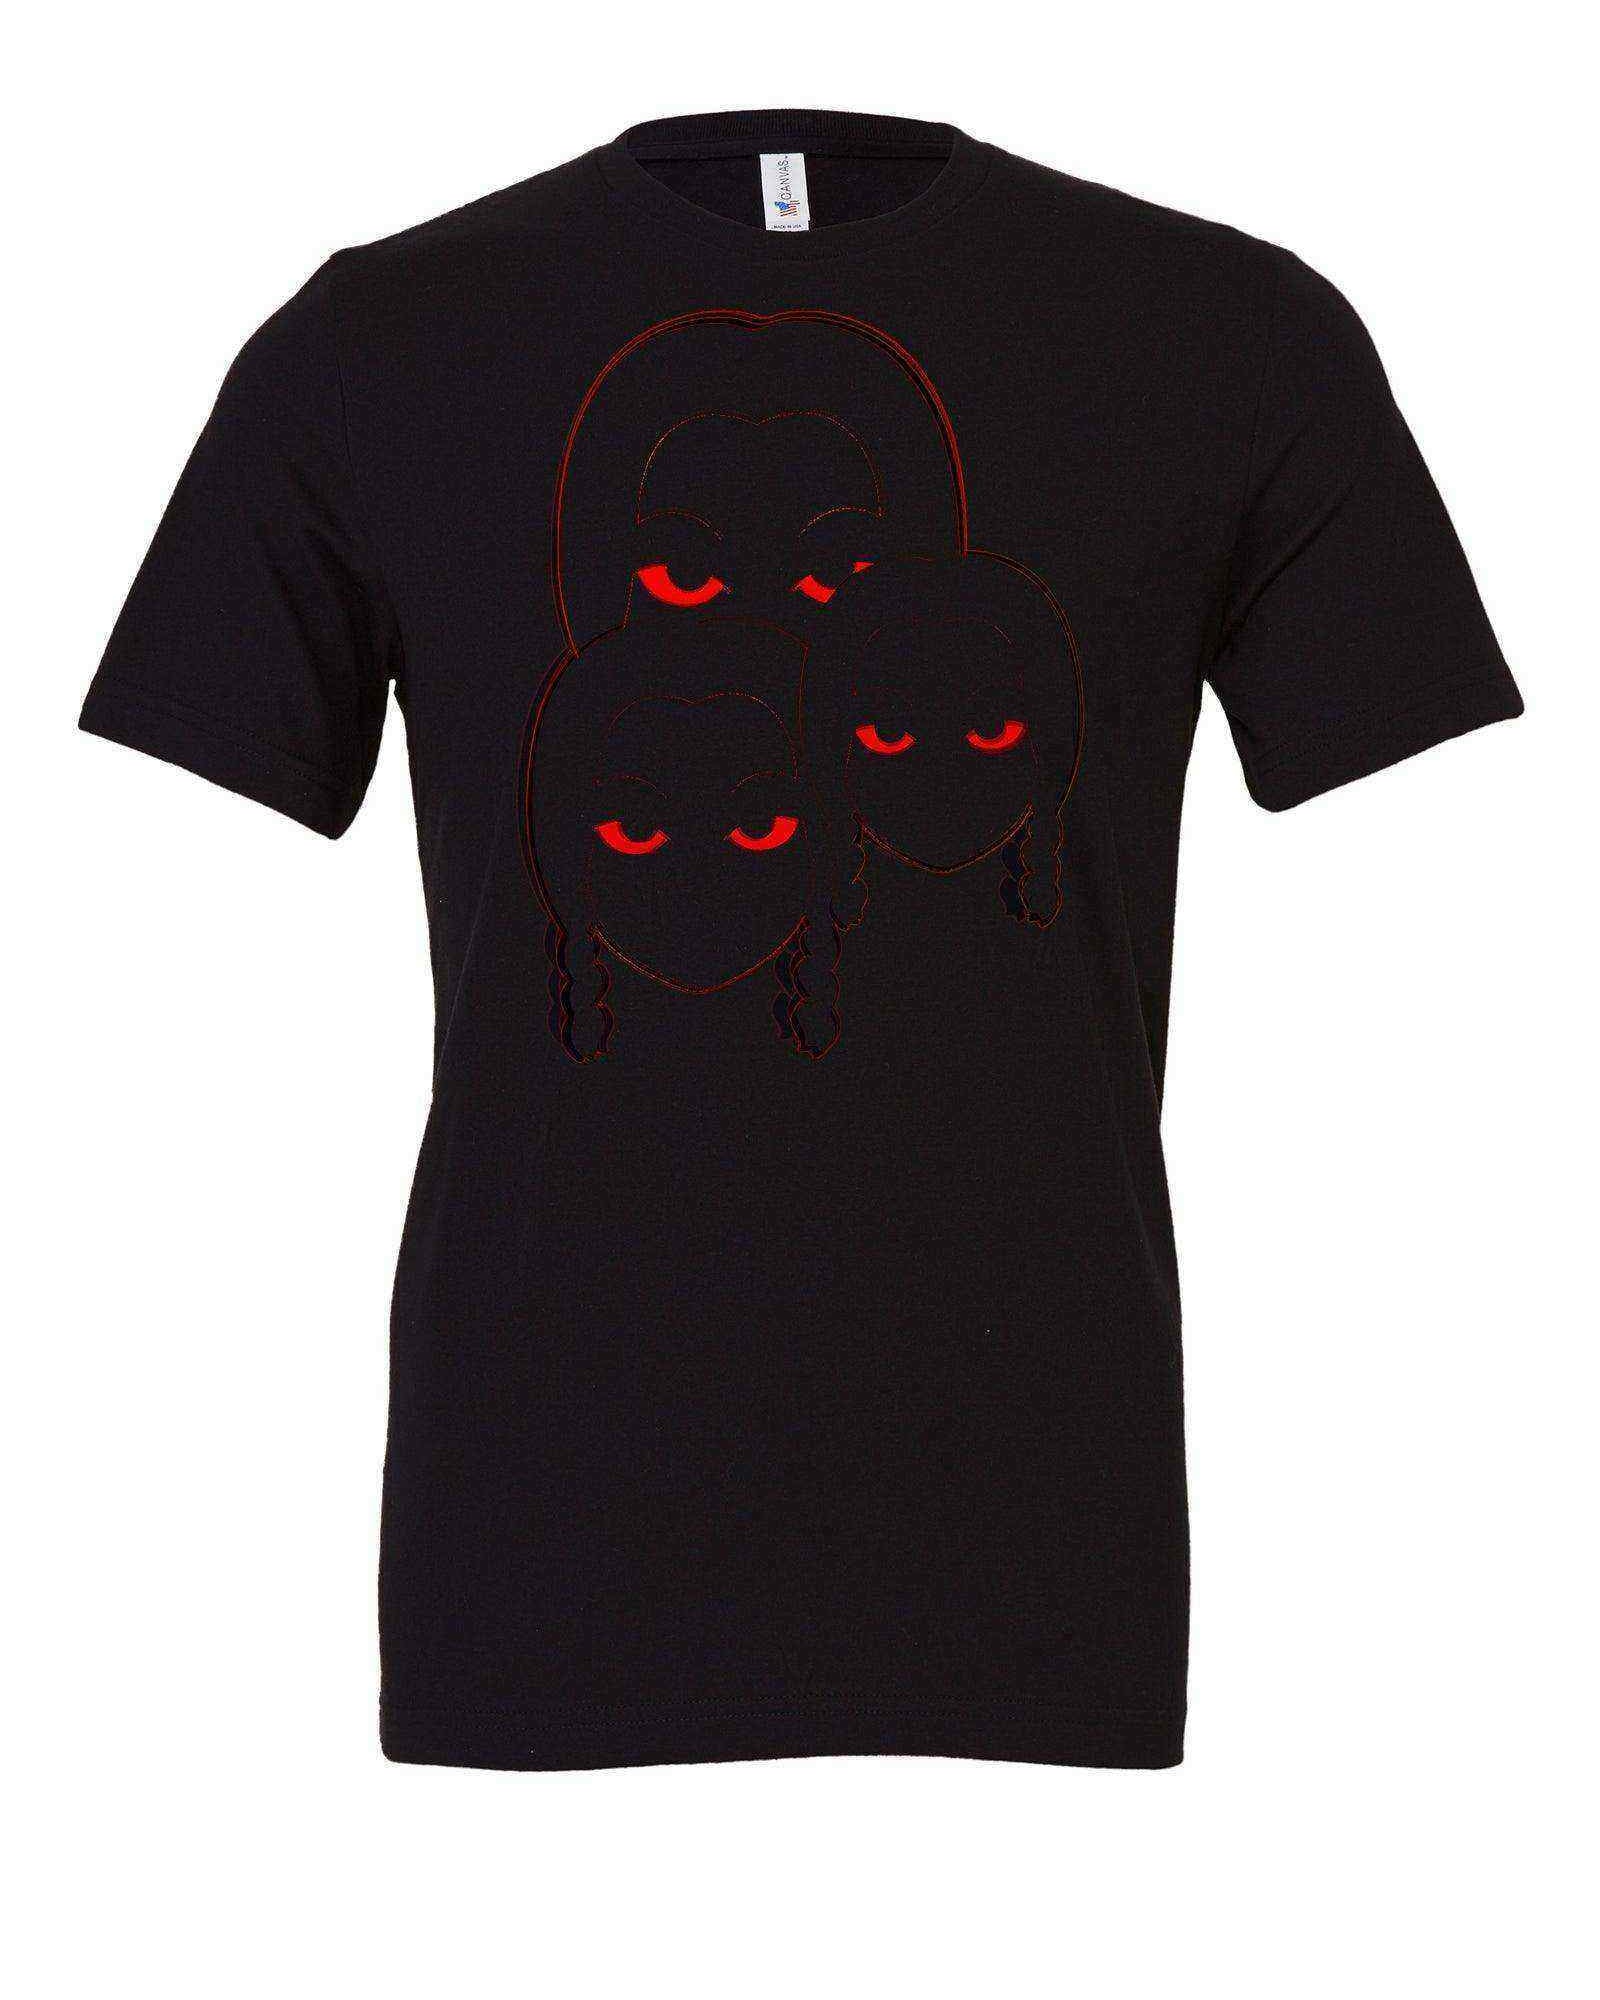 Toddler | Creepy Wednesday Shirt | The Addams Shirt | Red Wednesday - Dylan's Tees